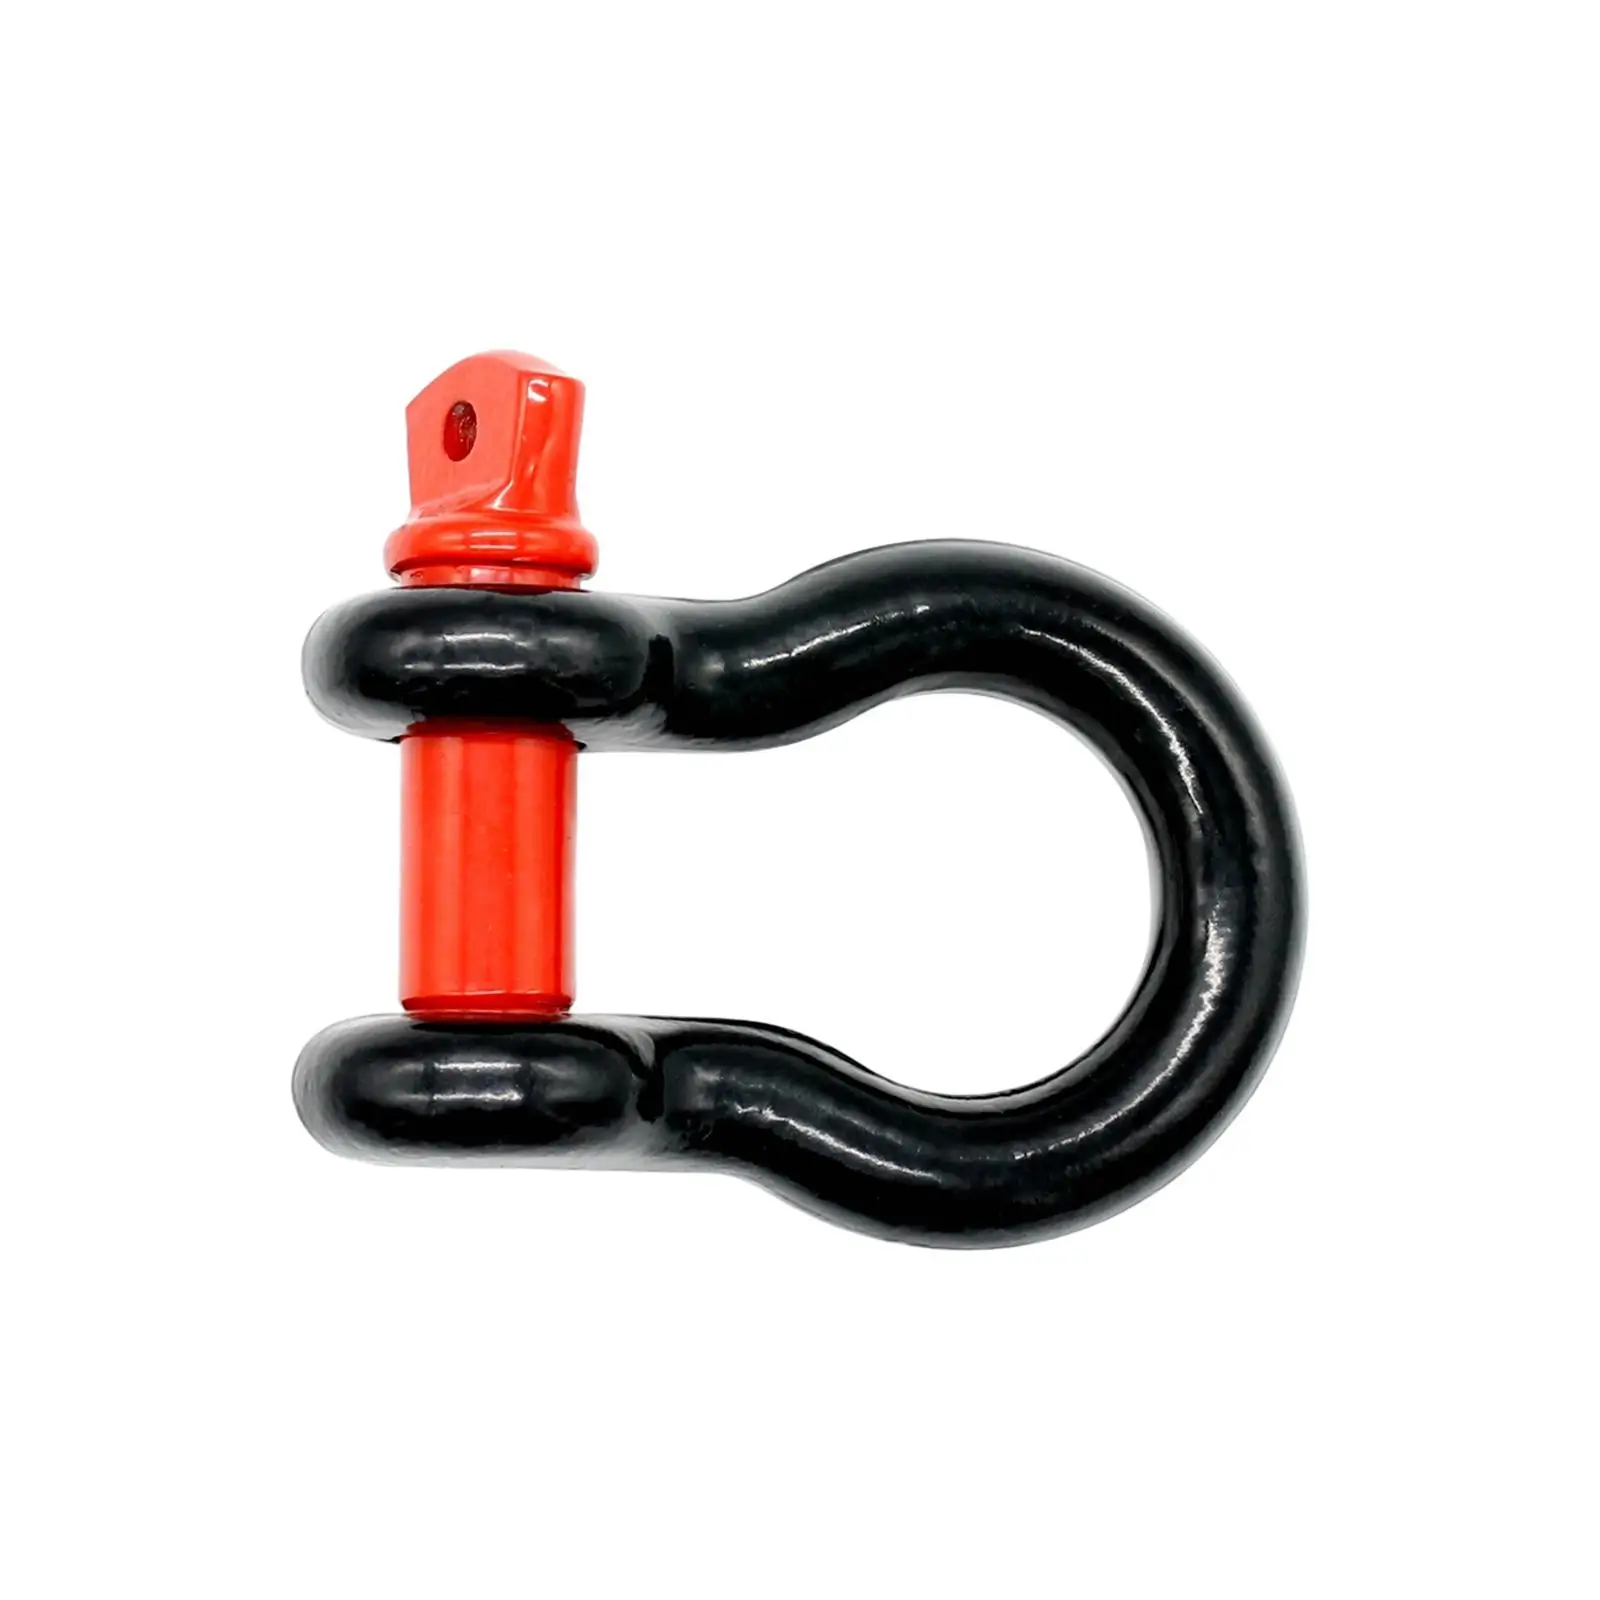 Tow Hook Ring D Ring Front Tow Hook for Vehicle Car Trailer Hitch Winch Accessories Automobile Repairing Accessory premium